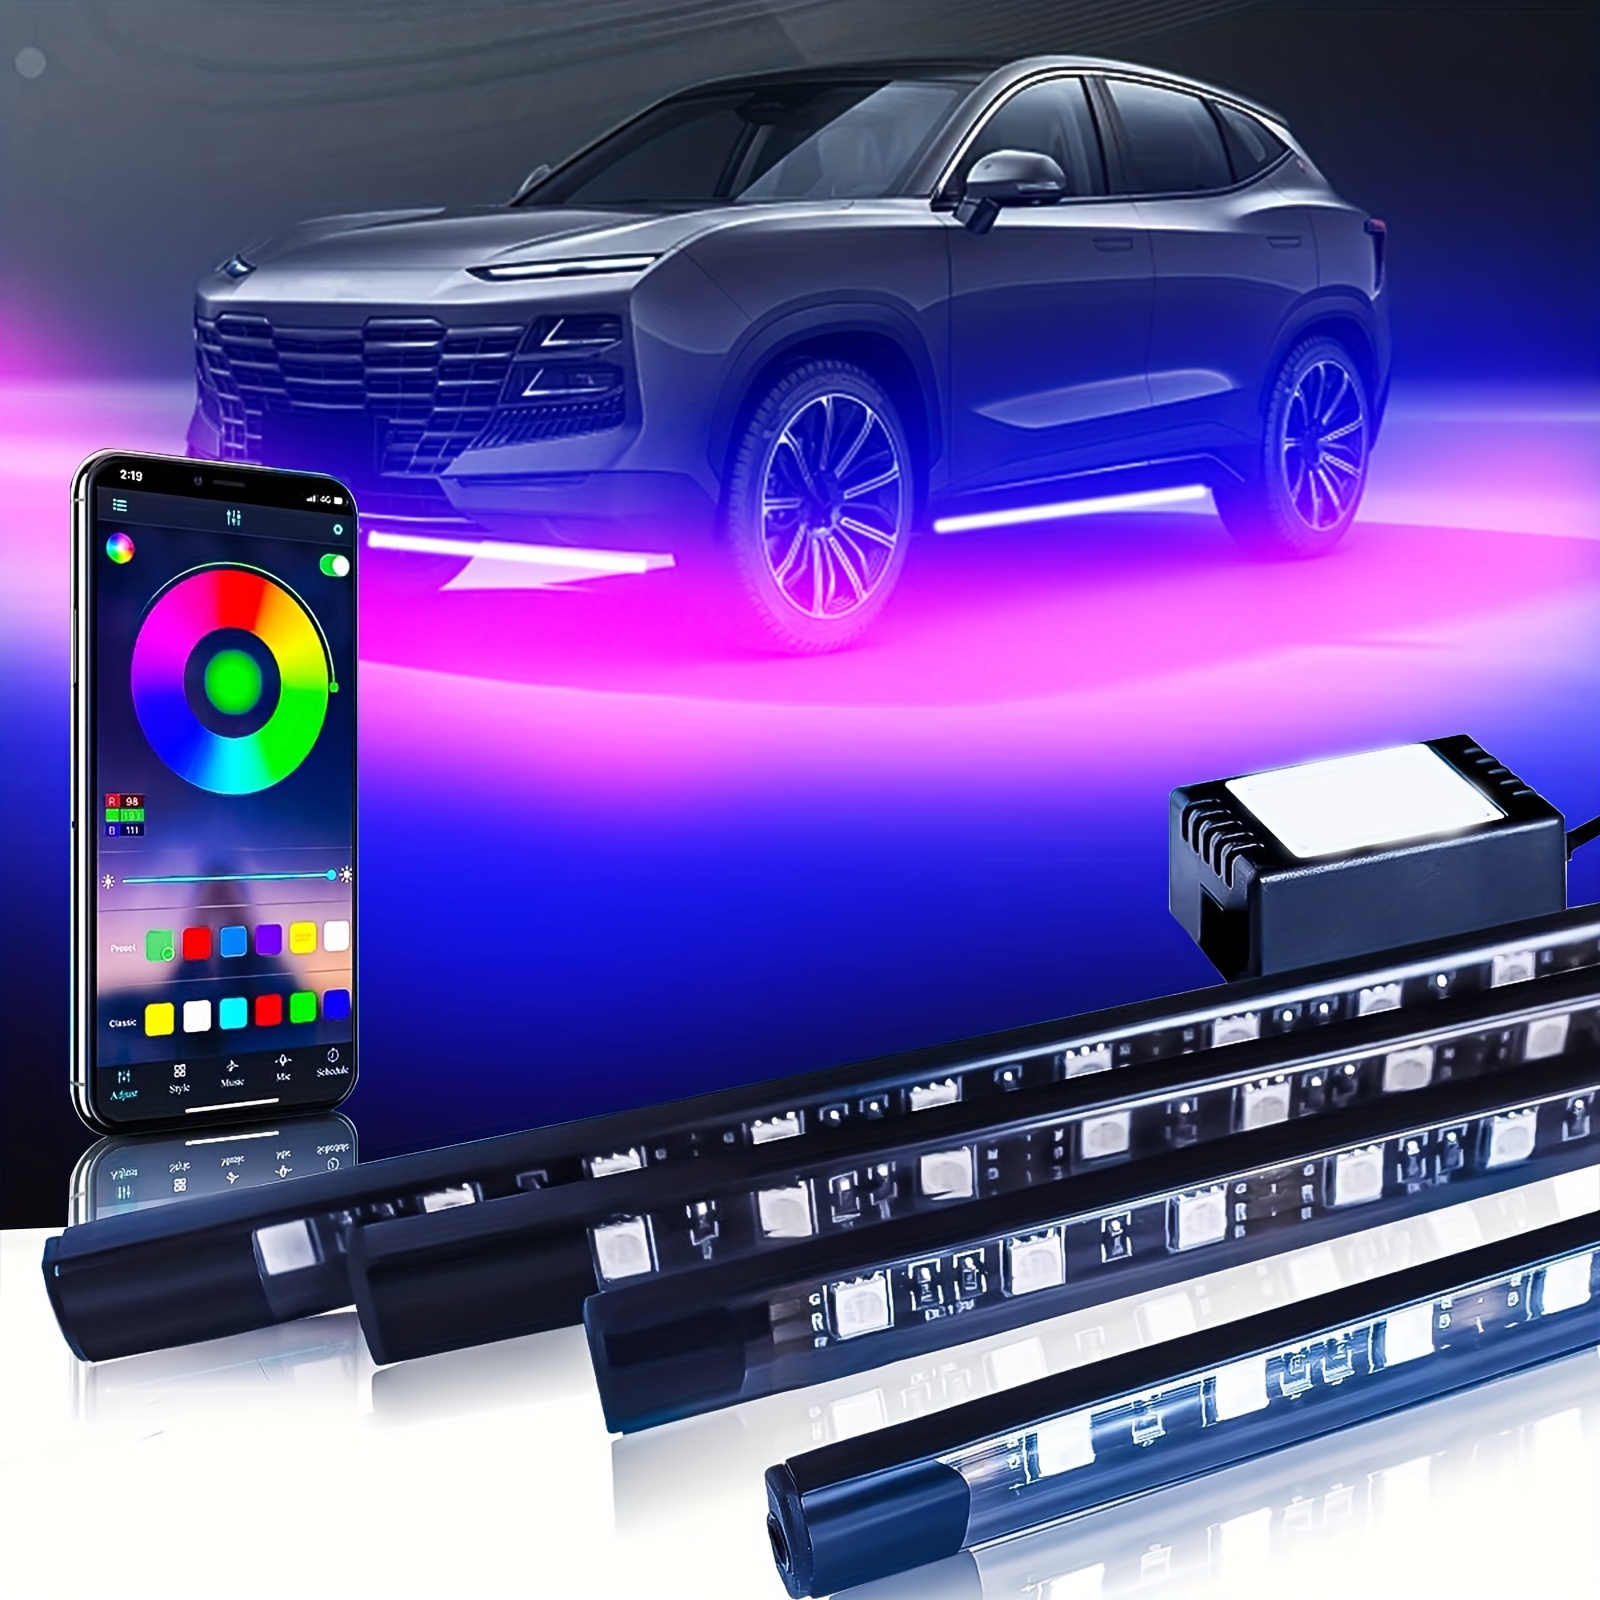 Auto Led Chassis Atmosphäre Licht, Universal Chassis Dekoration Licht Led  Bunte Auto Sprachsteuerung Chassis Licht Auto One Drag Four App +  Controller - Auto - Temu